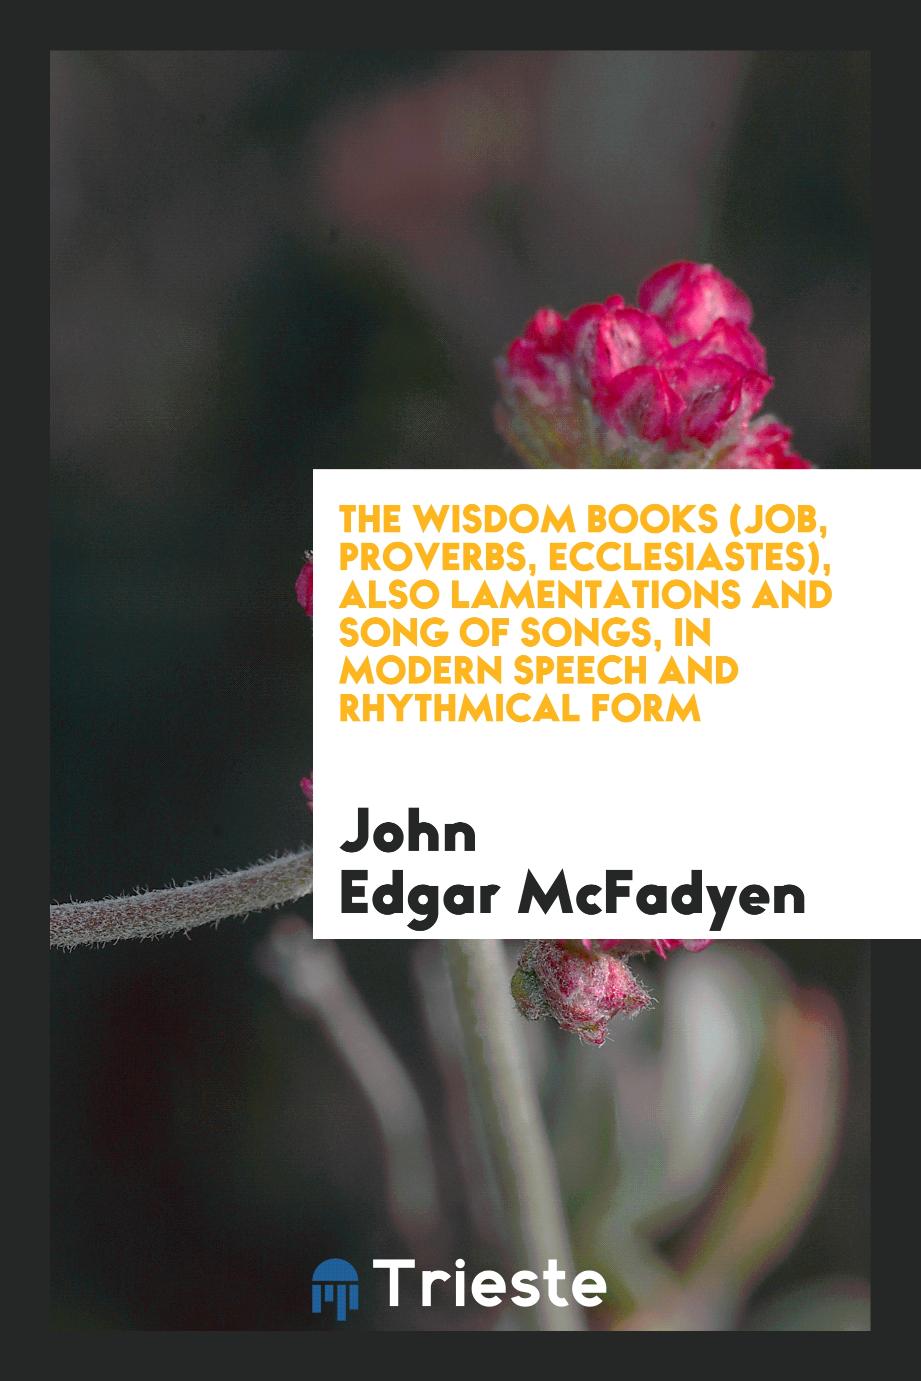 The Wisdom Books (Job, Proverbs, Ecclesiastes), also Lamentations and Song of Songs, in modern speech and rhythmical form